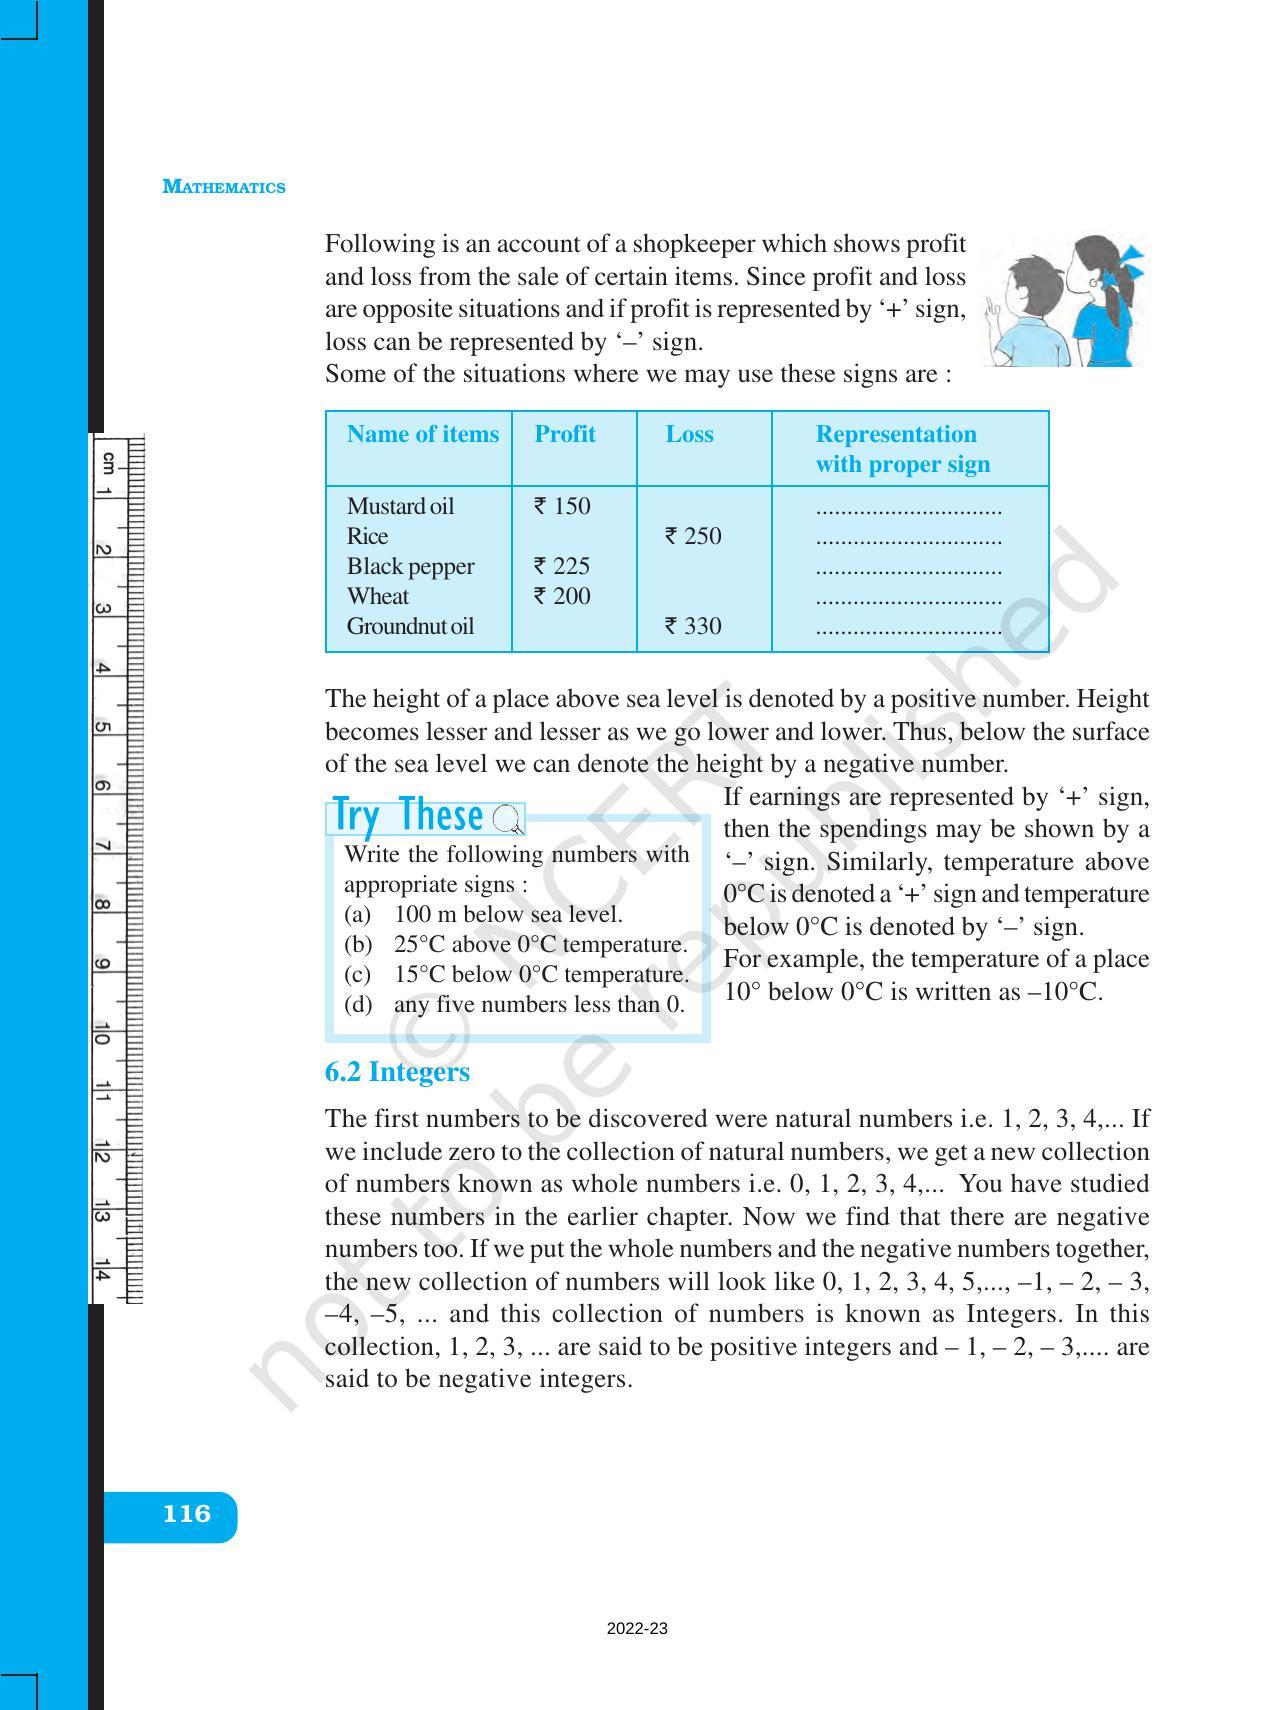 NCERT Book for Class 6 Maths: Chapter 6-Integers - Page 4